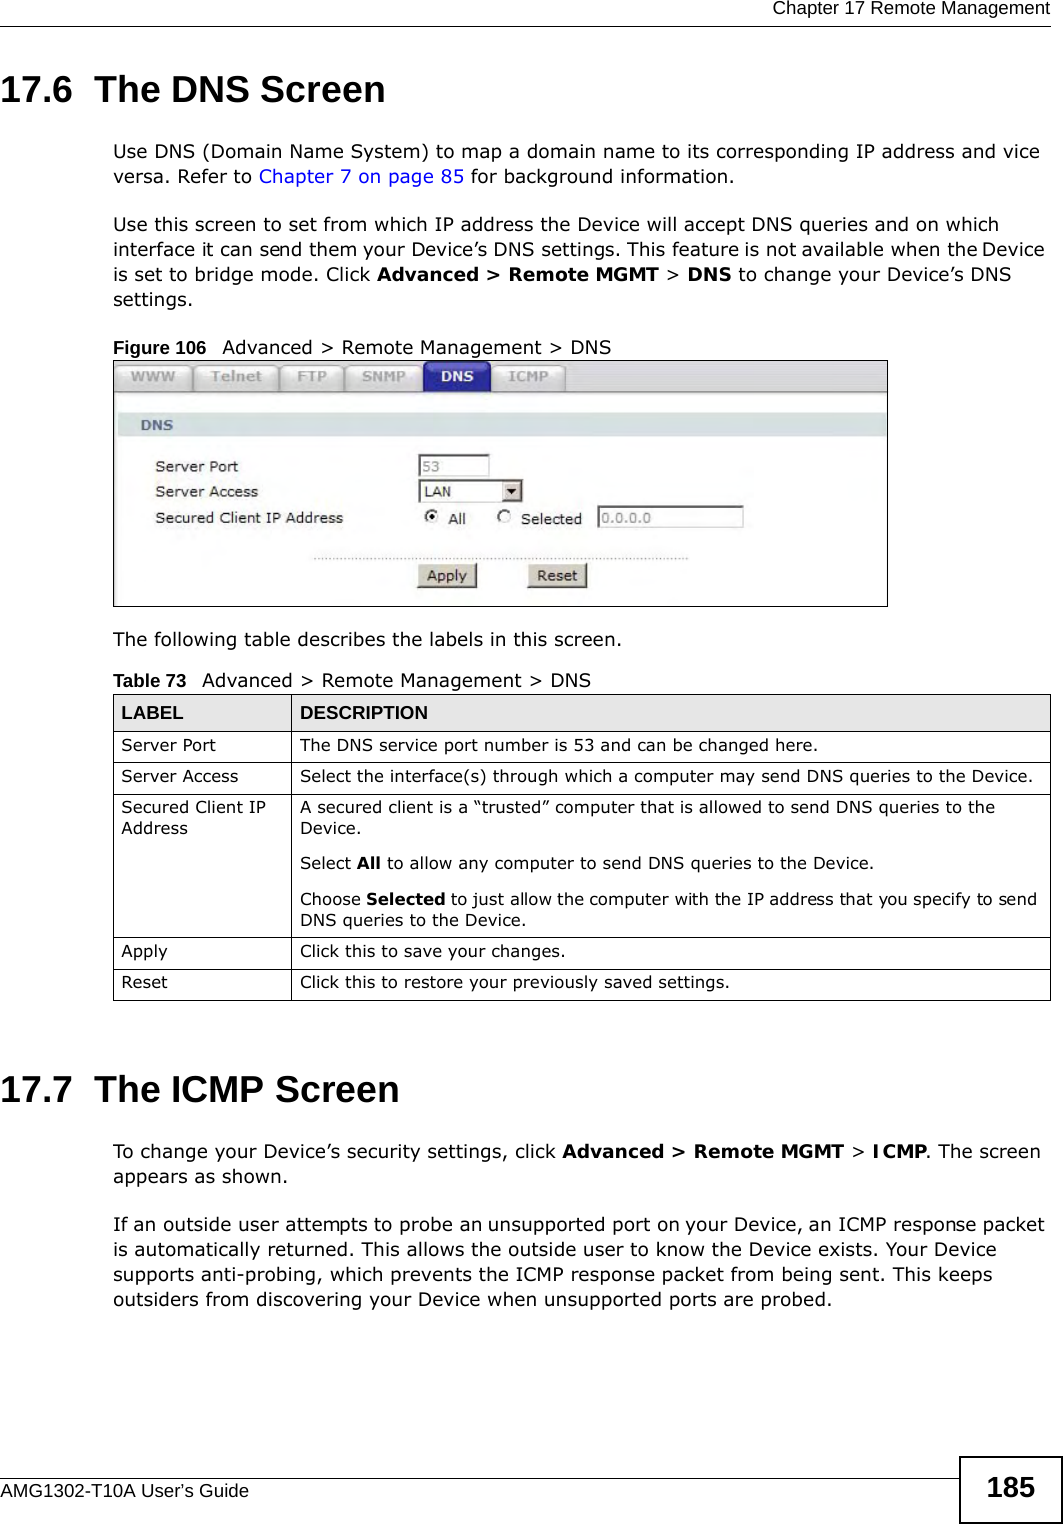  Chapter 17 Remote ManagementAMG1302-T10A User’s Guide 18517.6  The DNS Screen Use DNS (Domain Name System) to map a domain name to its corresponding IP address and vice versa. Refer to Chapter 7 on page 85 for background information. Use this screen to set from which IP address the Device will accept DNS queries and on which interface it can send them your Device’s DNS settings. This feature is not available when the Device is set to bridge mode. Click Advanced &gt; Remote MGMT &gt; DNS to change your Device’s DNS settings.Figure 106   Advanced &gt; Remote Management &gt; DNSThe following table describes the labels in this screen.17.7  The ICMP ScreenTo change your Device’s security settings, click Advanced &gt; Remote MGMT &gt; ICMP. The screen appears as shown.If an outside user attempts to probe an unsupported port on your Device, an ICMP response packet is automatically returned. This allows the outside user to know the Device exists. Your Device supports anti-probing, which prevents the ICMP response packet from being sent. This keeps outsiders from discovering your Device when unsupported ports are probed. Table 73   Advanced &gt; Remote Management &gt; DNSLABEL DESCRIPTIONServer Port The DNS service port number is 53 and can be changed here.Server Access  Select the interface(s) through which a computer may send DNS queries to the Device.Secured Client IP AddressA secured client is a “trusted” computer that is allowed to send DNS queries to the Device.Select All to allow any computer to send DNS queries to the Device.Choose Selected to just allow the computer with the IP address that you specify to send DNS queries to the Device.Apply Click this to save your changes.Reset Click this to restore your previously saved settings.